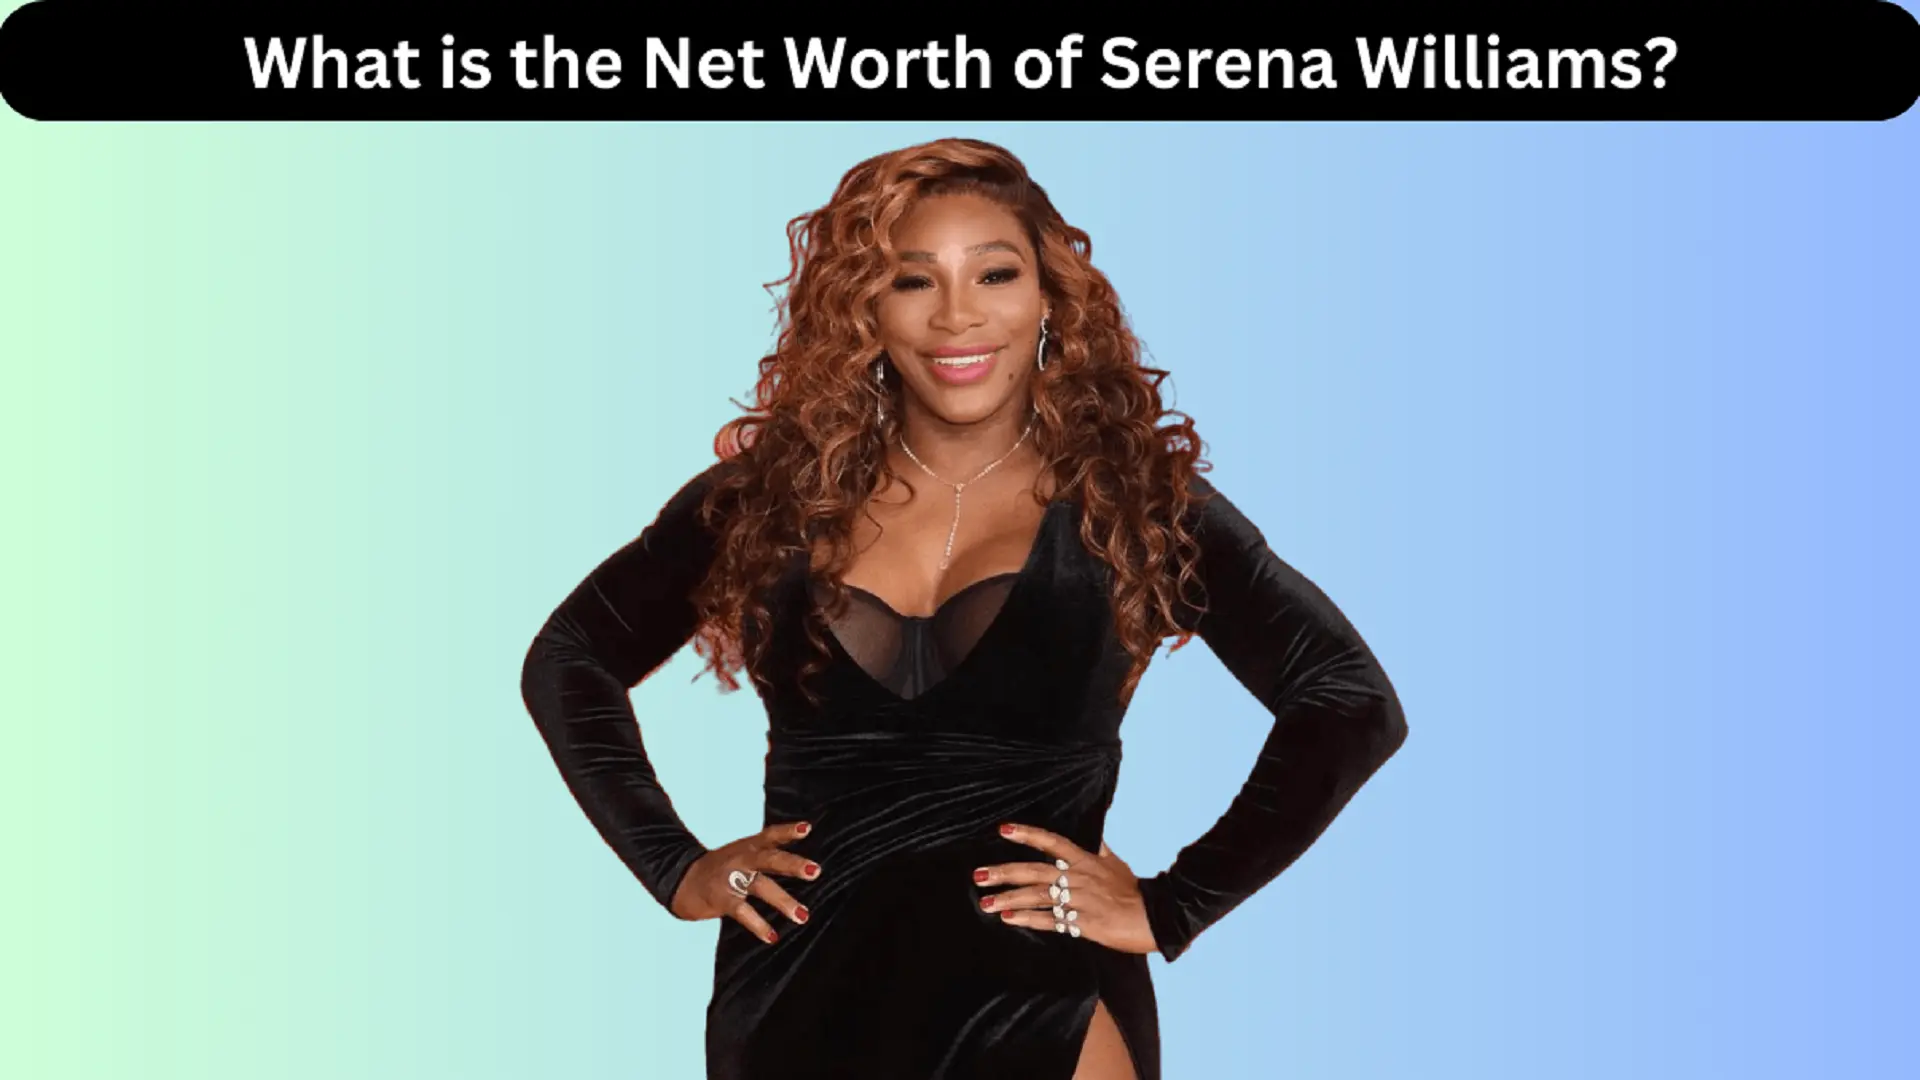 What is the Net Worth of Serena William